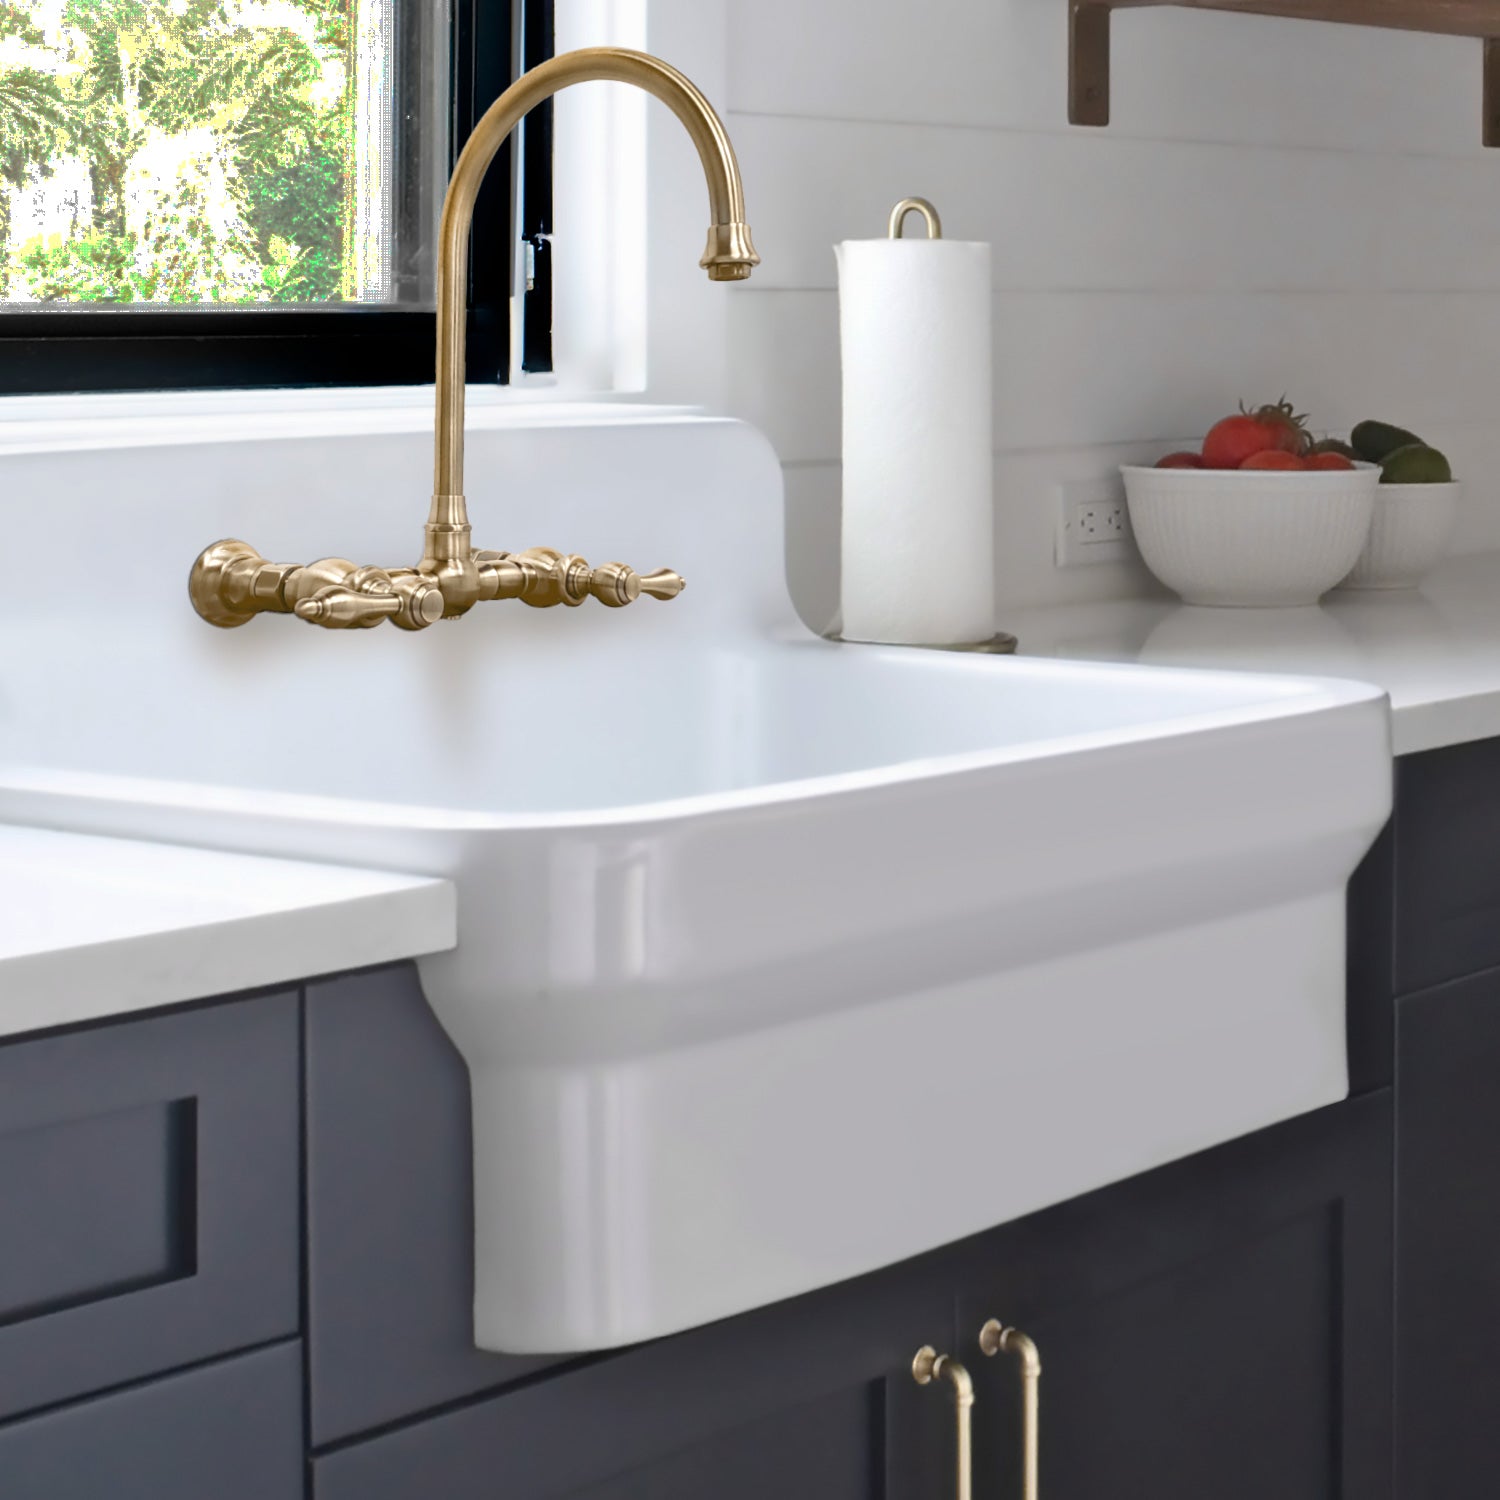 30" Fireclay kitchen/utility sink with high back splash and faucet drilling